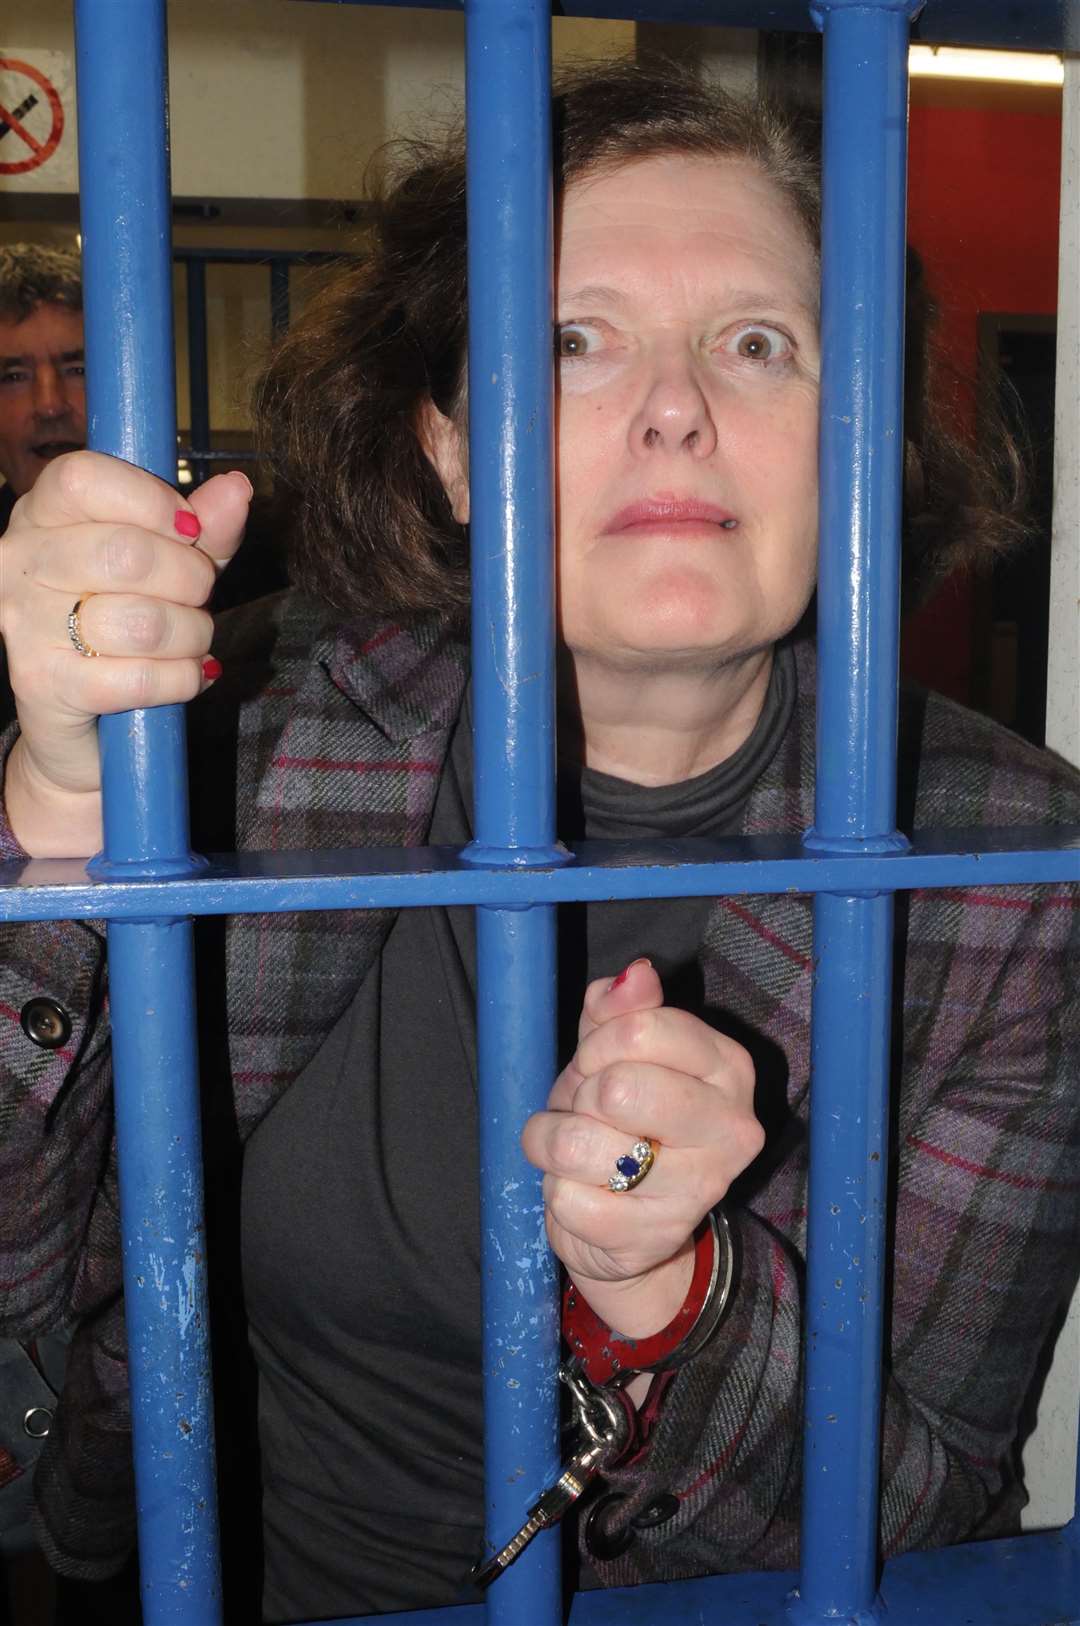 Justice Adele Williams, senior judge, is locked up for the morning